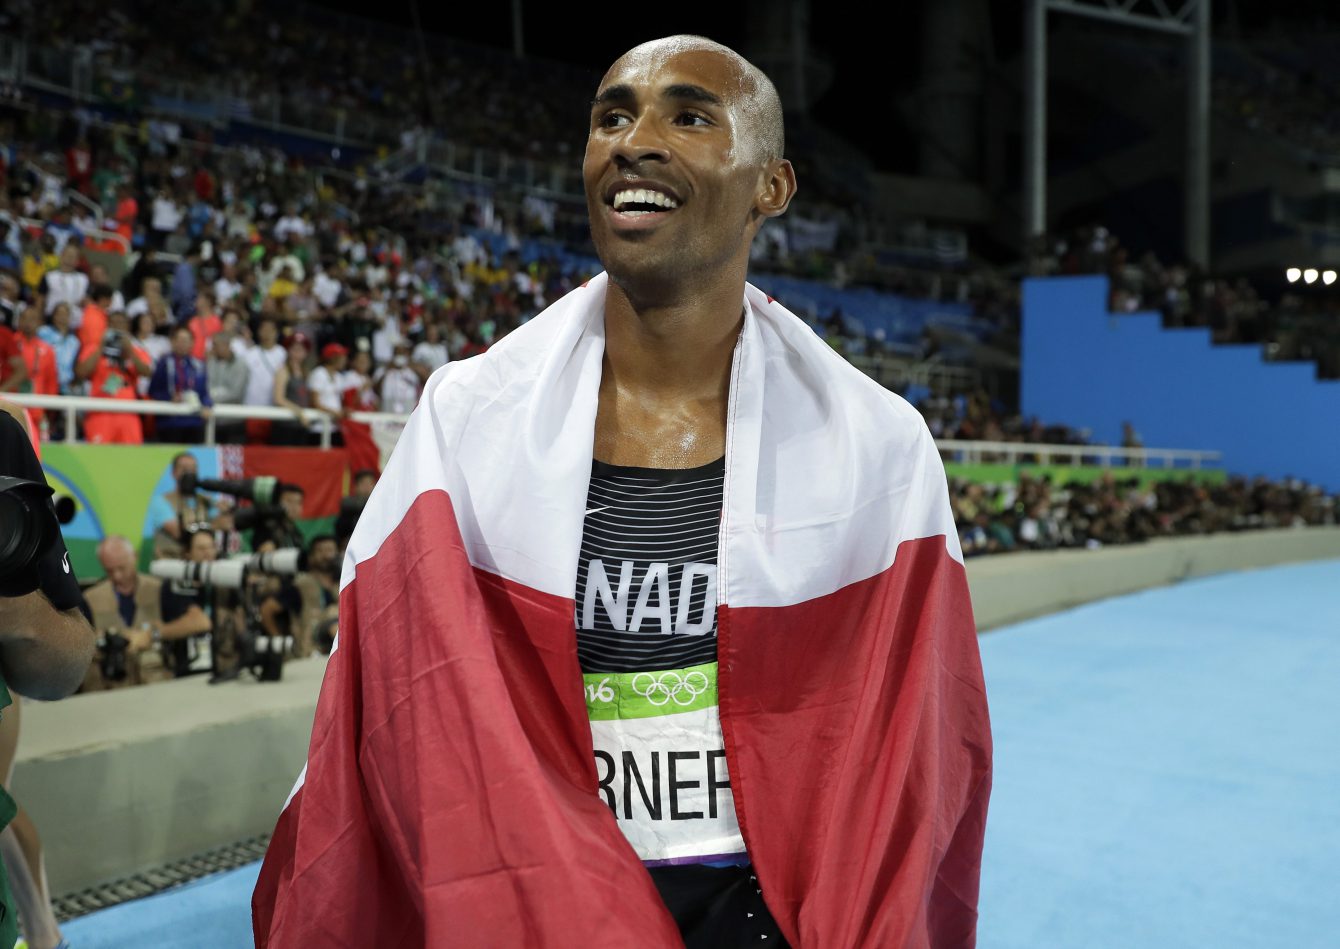 Canada's Damian Warner celebrates after winning the bronze medal in the decathlon, during the athletics competitions of the 2016 Summer Olympics at the Olympic stadium in Rio de Janeiro, Brazil, Thursday, Aug. 18, 2016. (AP Photo/Matt Slocum)